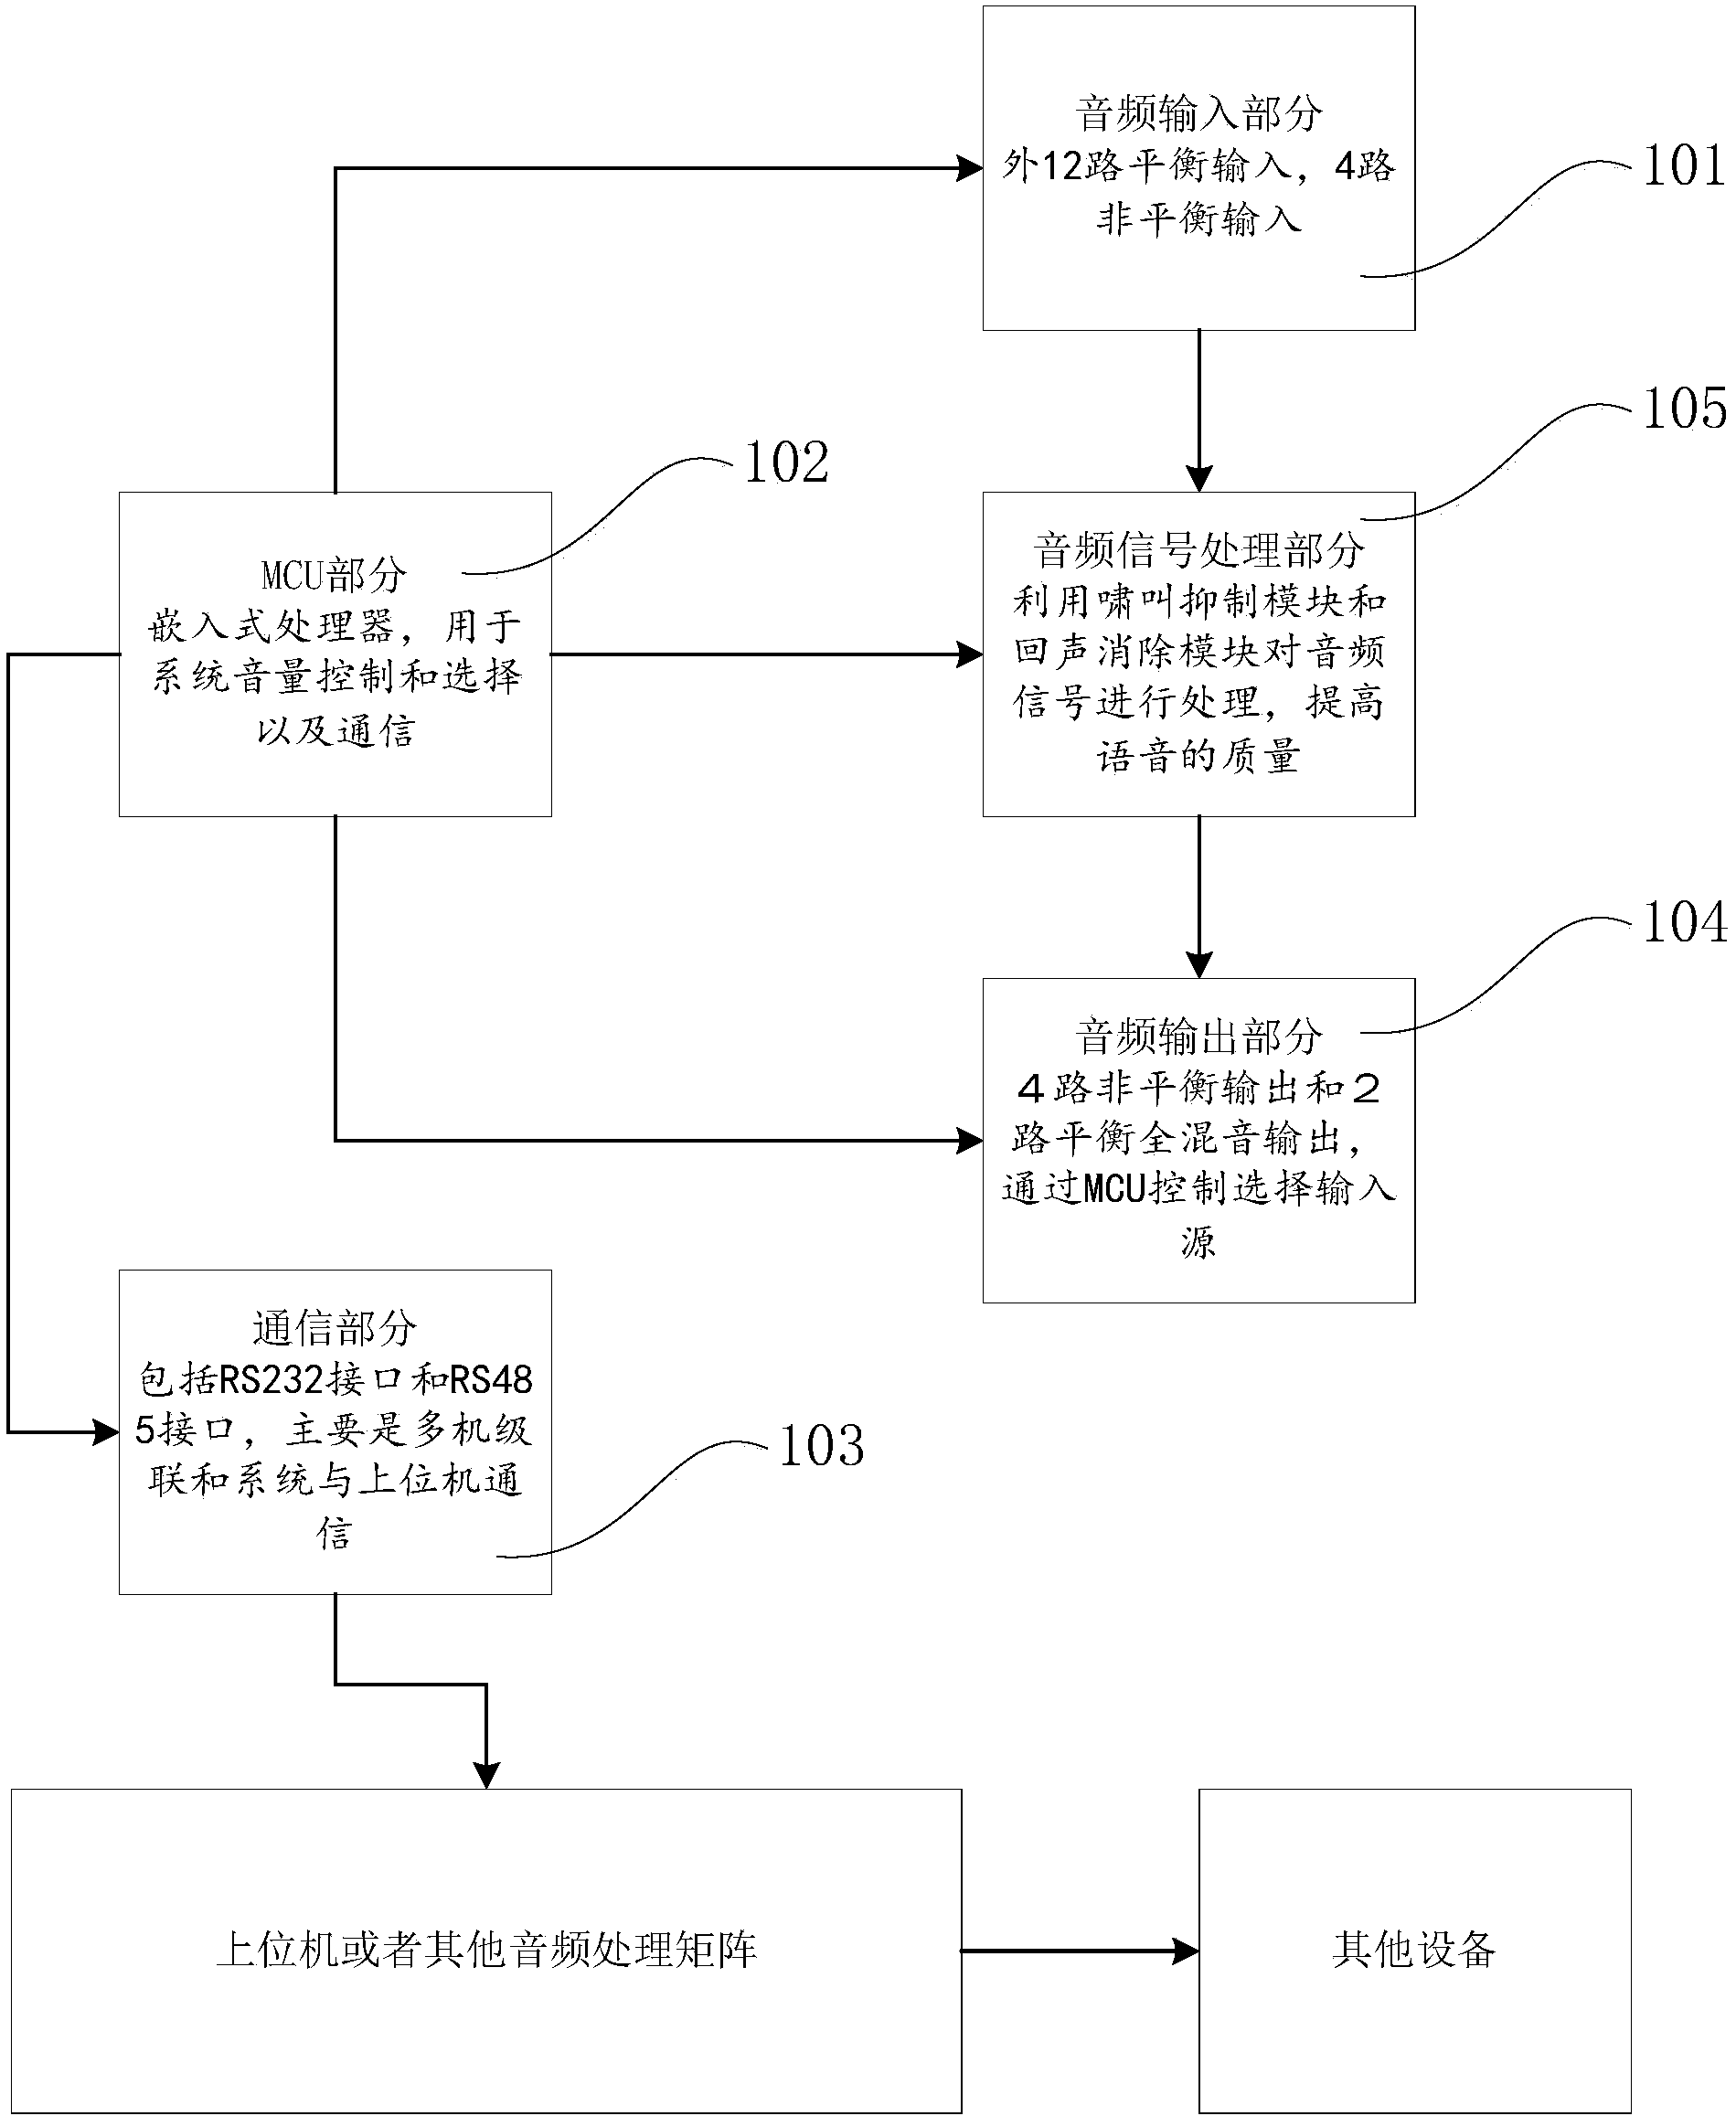 Audio processing device and method